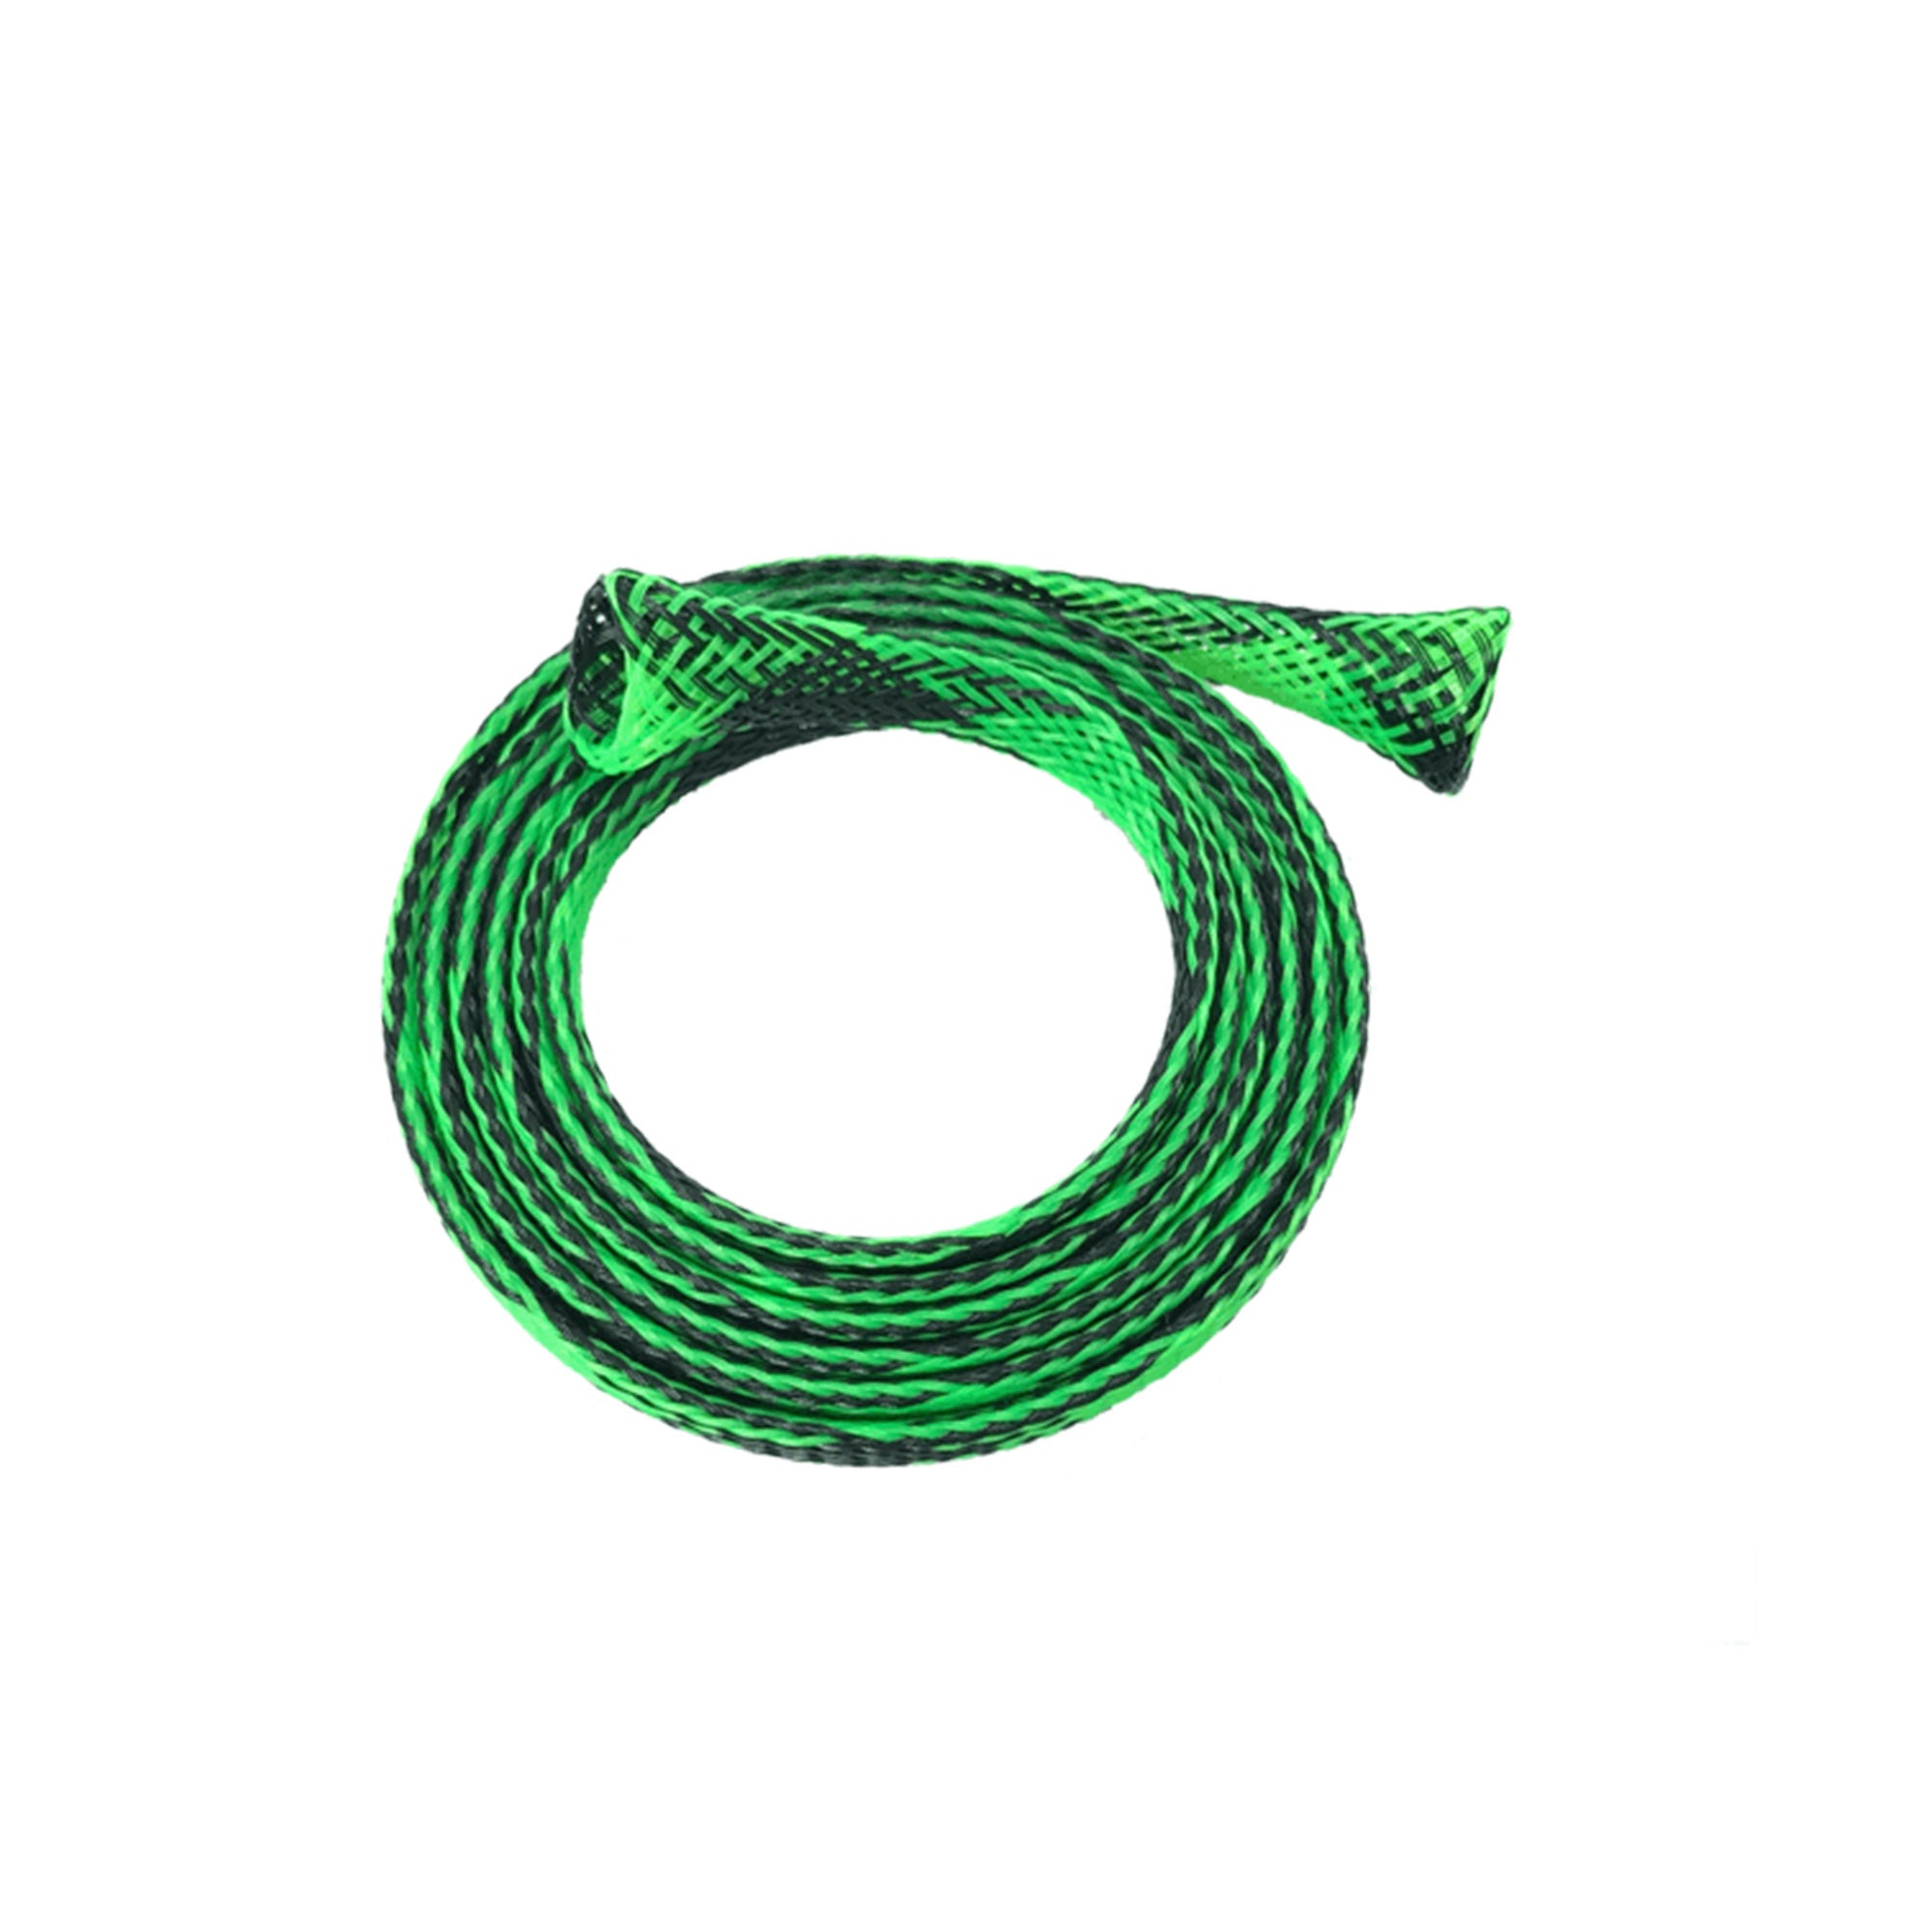 snake skinz metal detector coil wire covers viper green and black